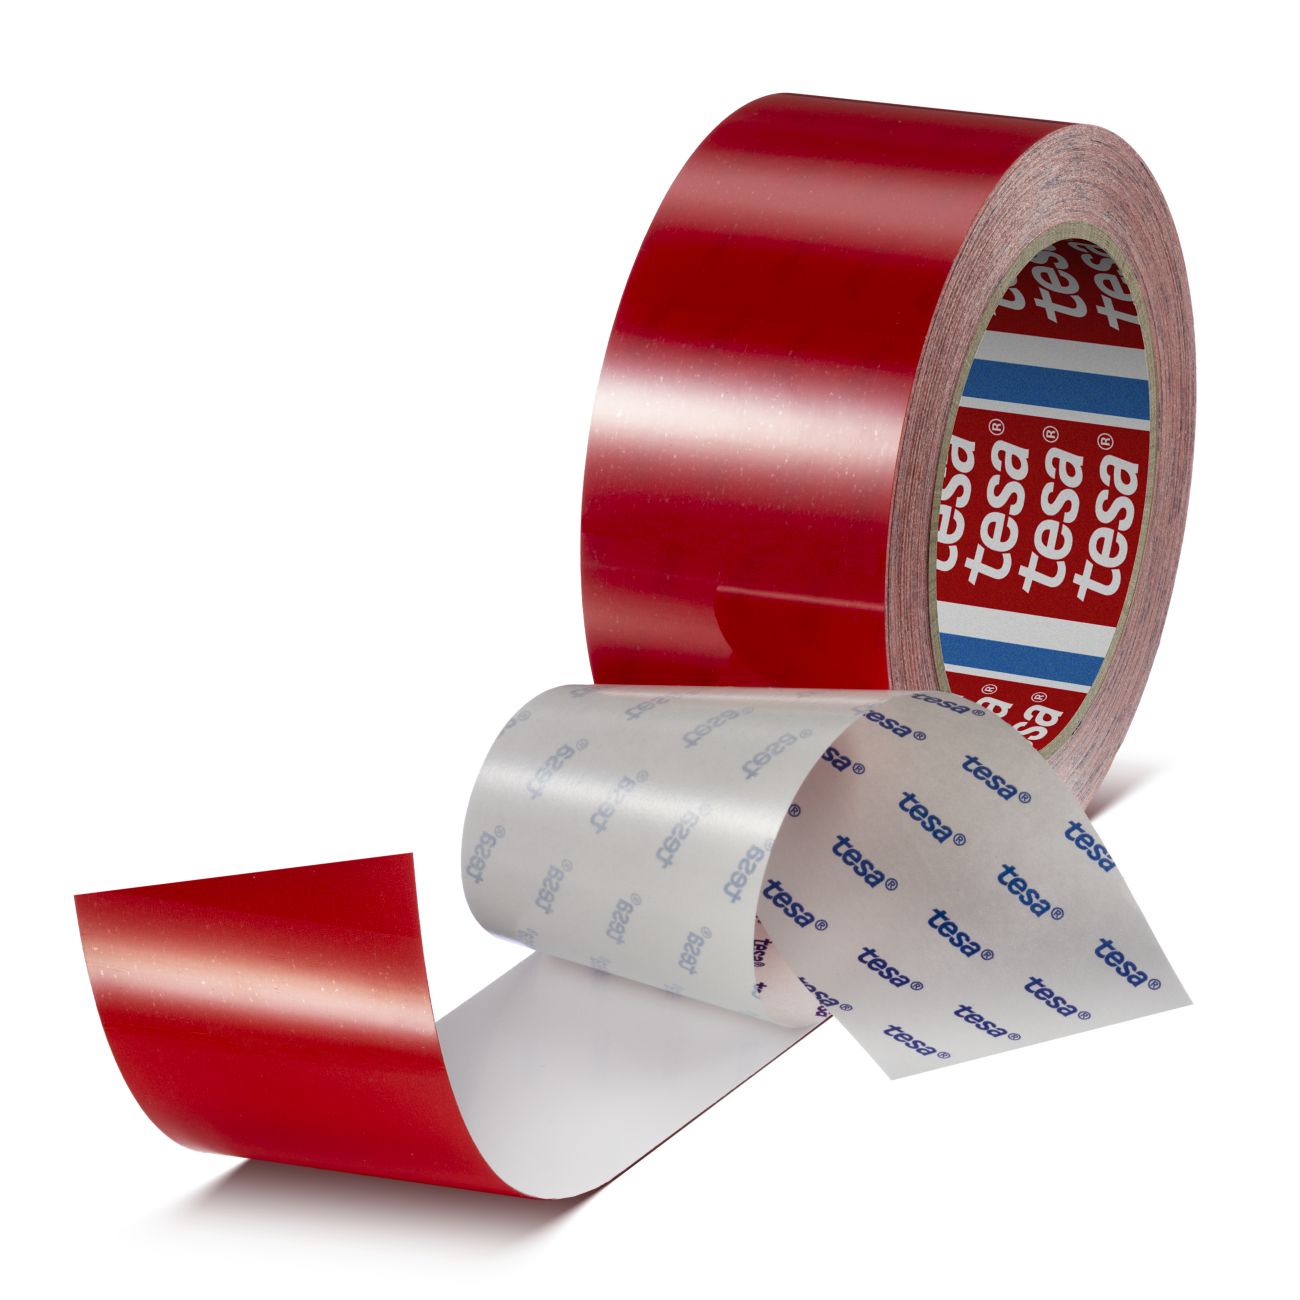 Tesa 60960 Hard-wearing and scratch-resistant floor marking tape 50mmx20m red